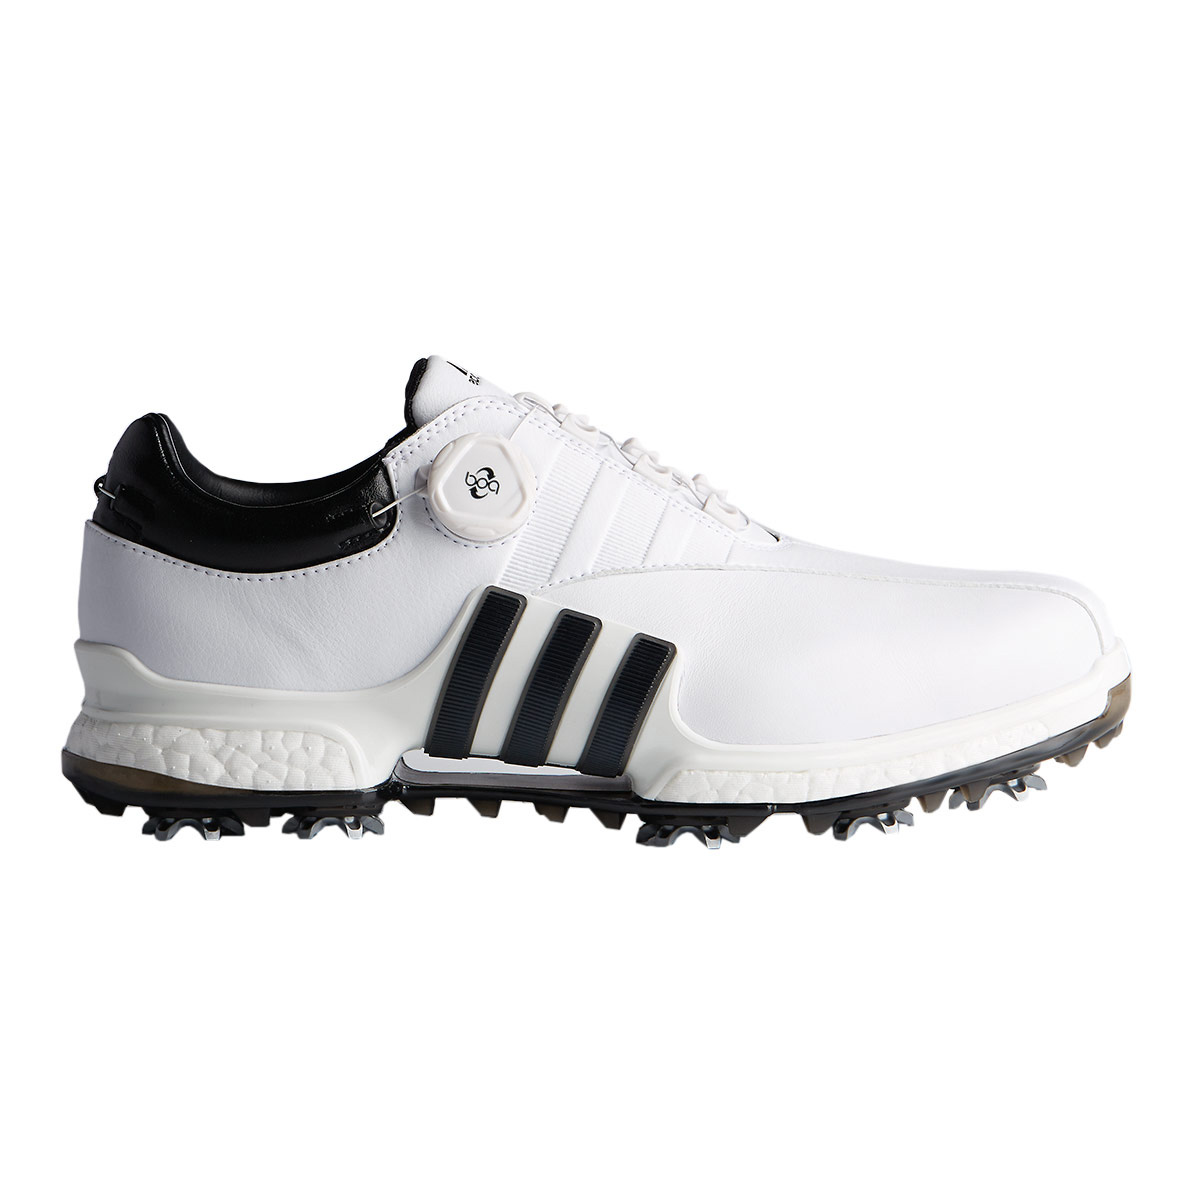 adidas Men's Tour360 BOA Waterproof Golf Shoes from golf